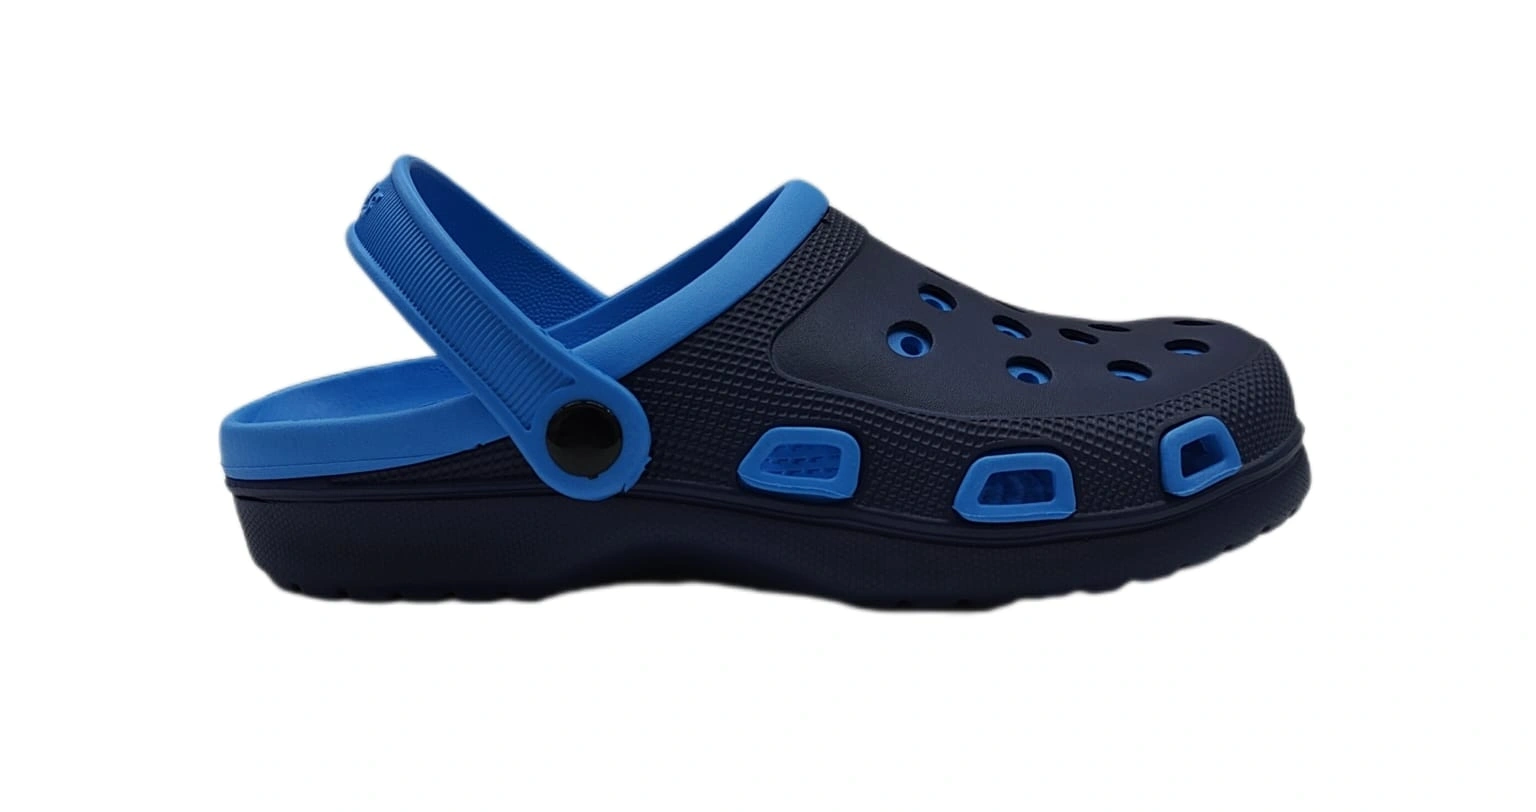 Clog Sandals for Men and Women: Comfortable, Lightweight Design with Durable Upper and Slip-Resistant Outsole for All-Day Wear-Blue-UK 9-1